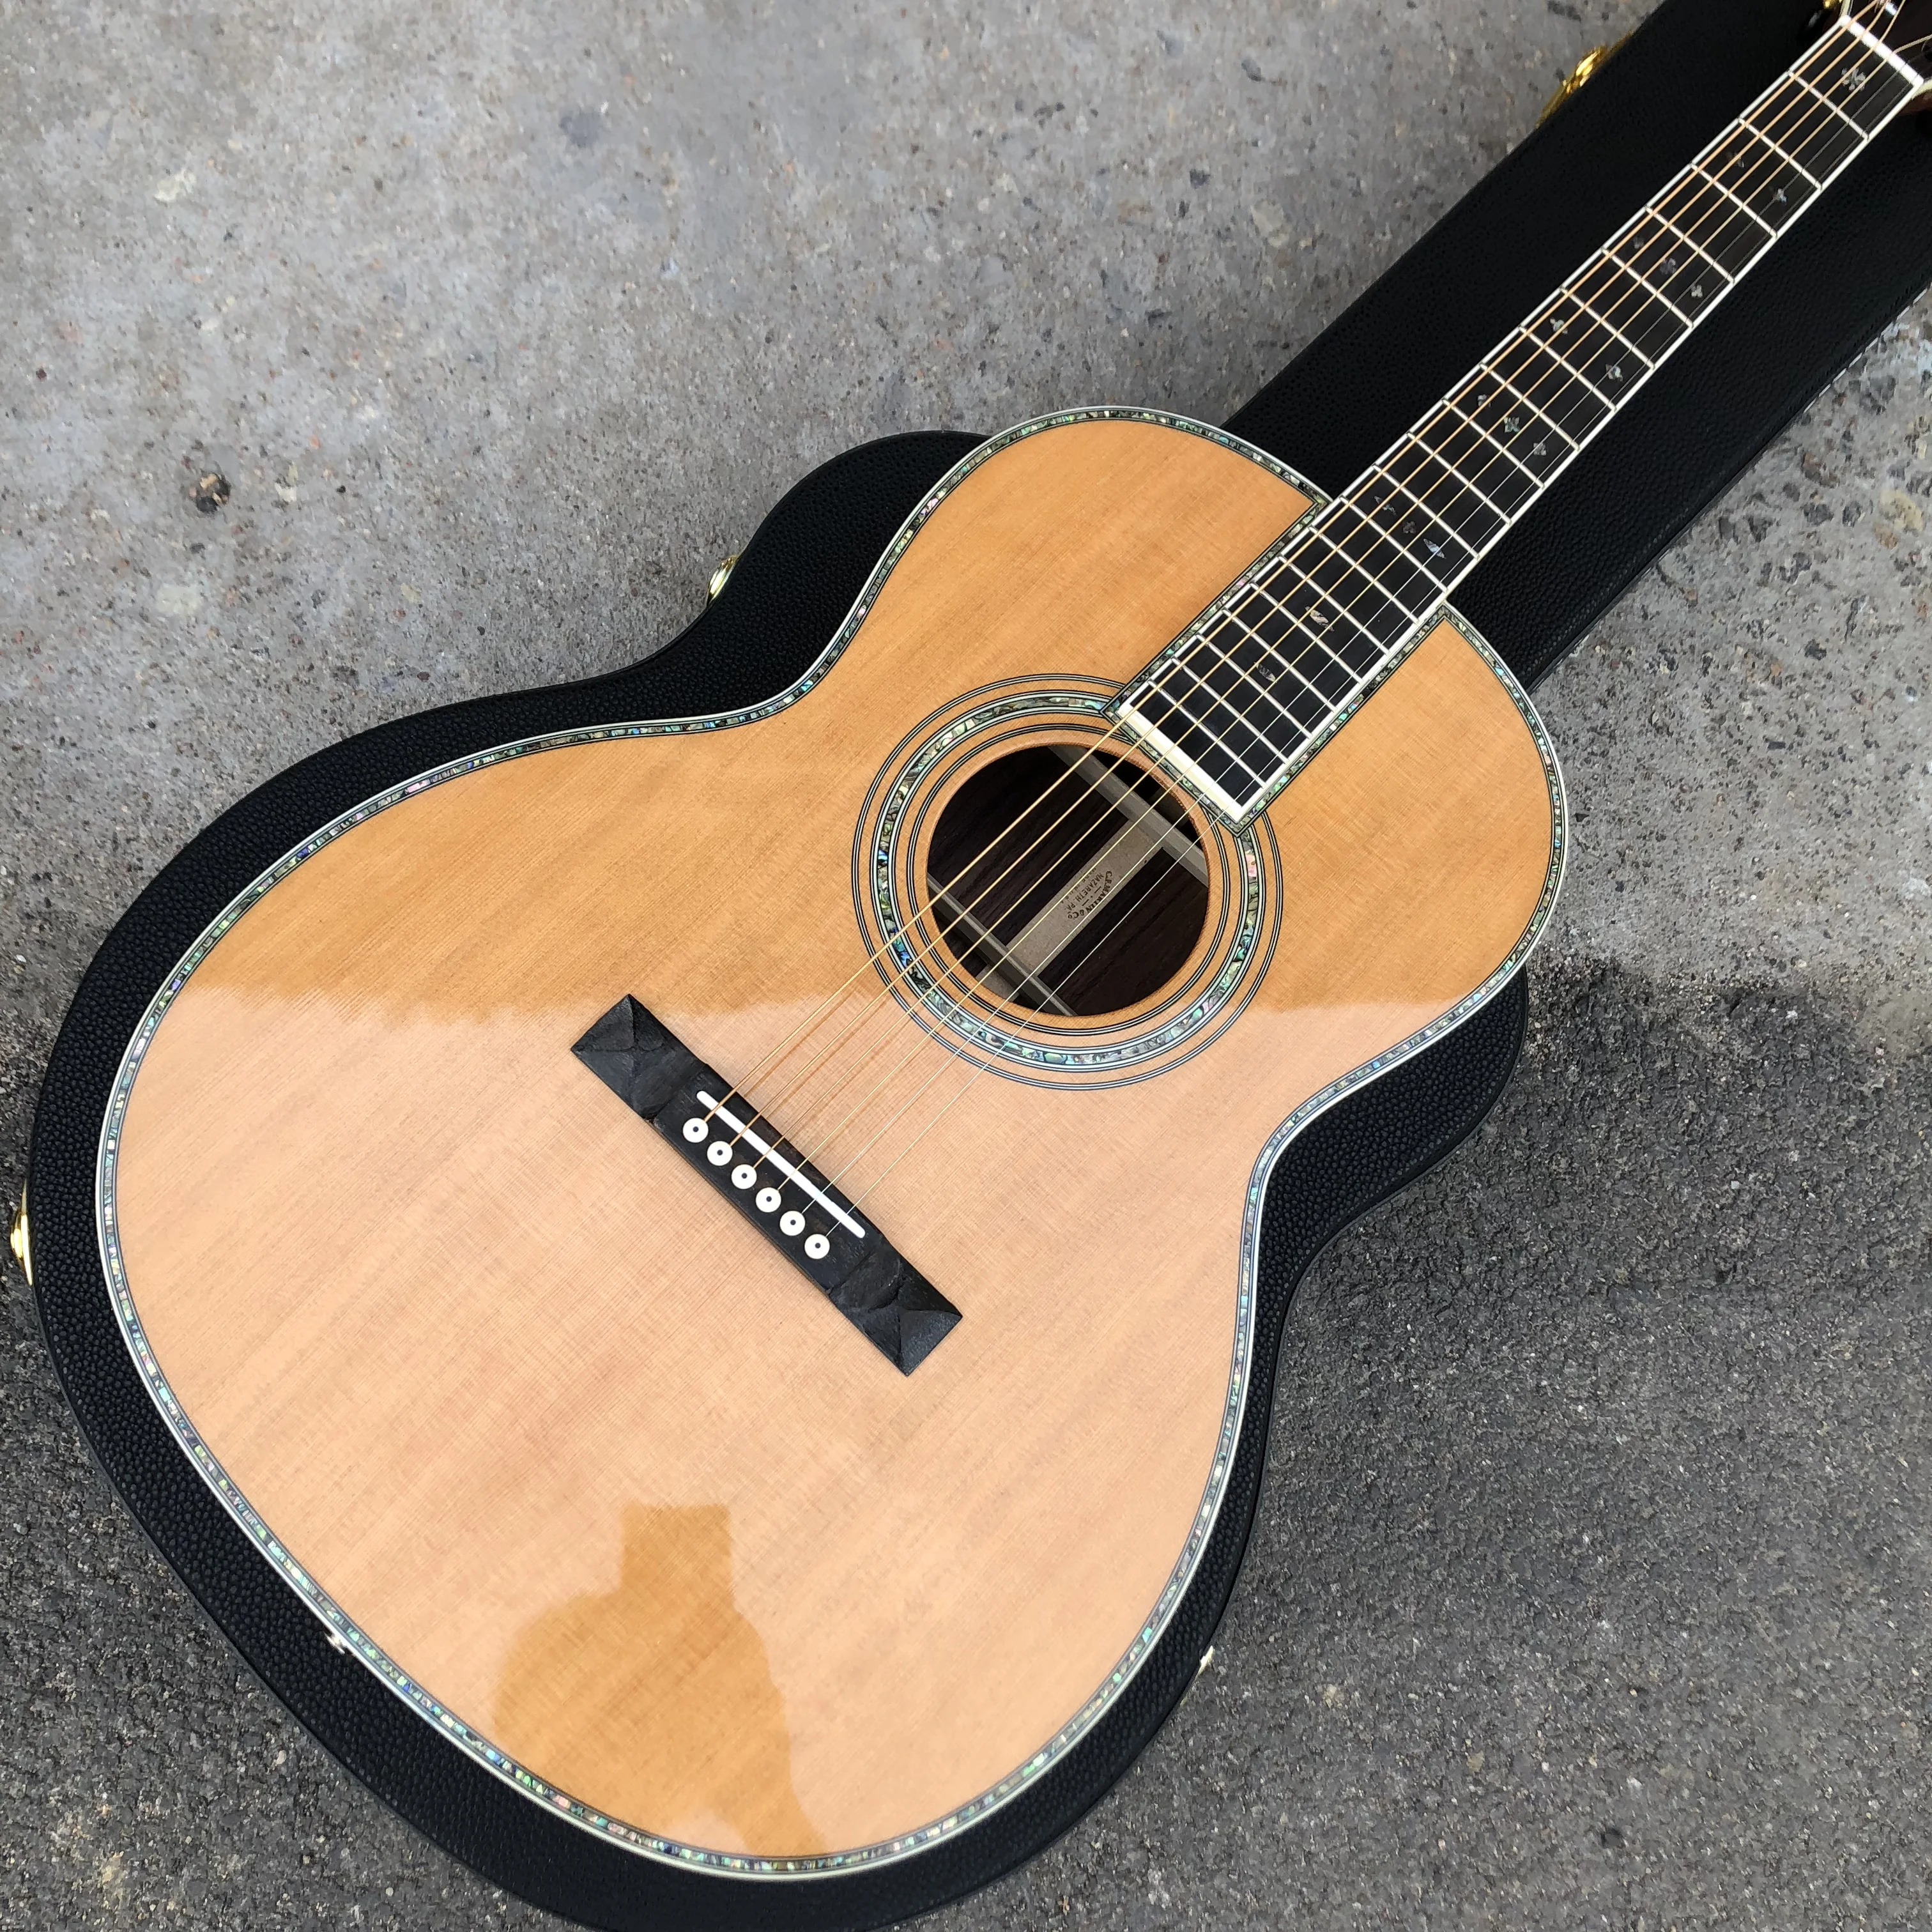 

OEM 39 inch ooo style classic acoustic Guitar,Ebony fingerboard Solid spruce top Acoustic Electric Guitar